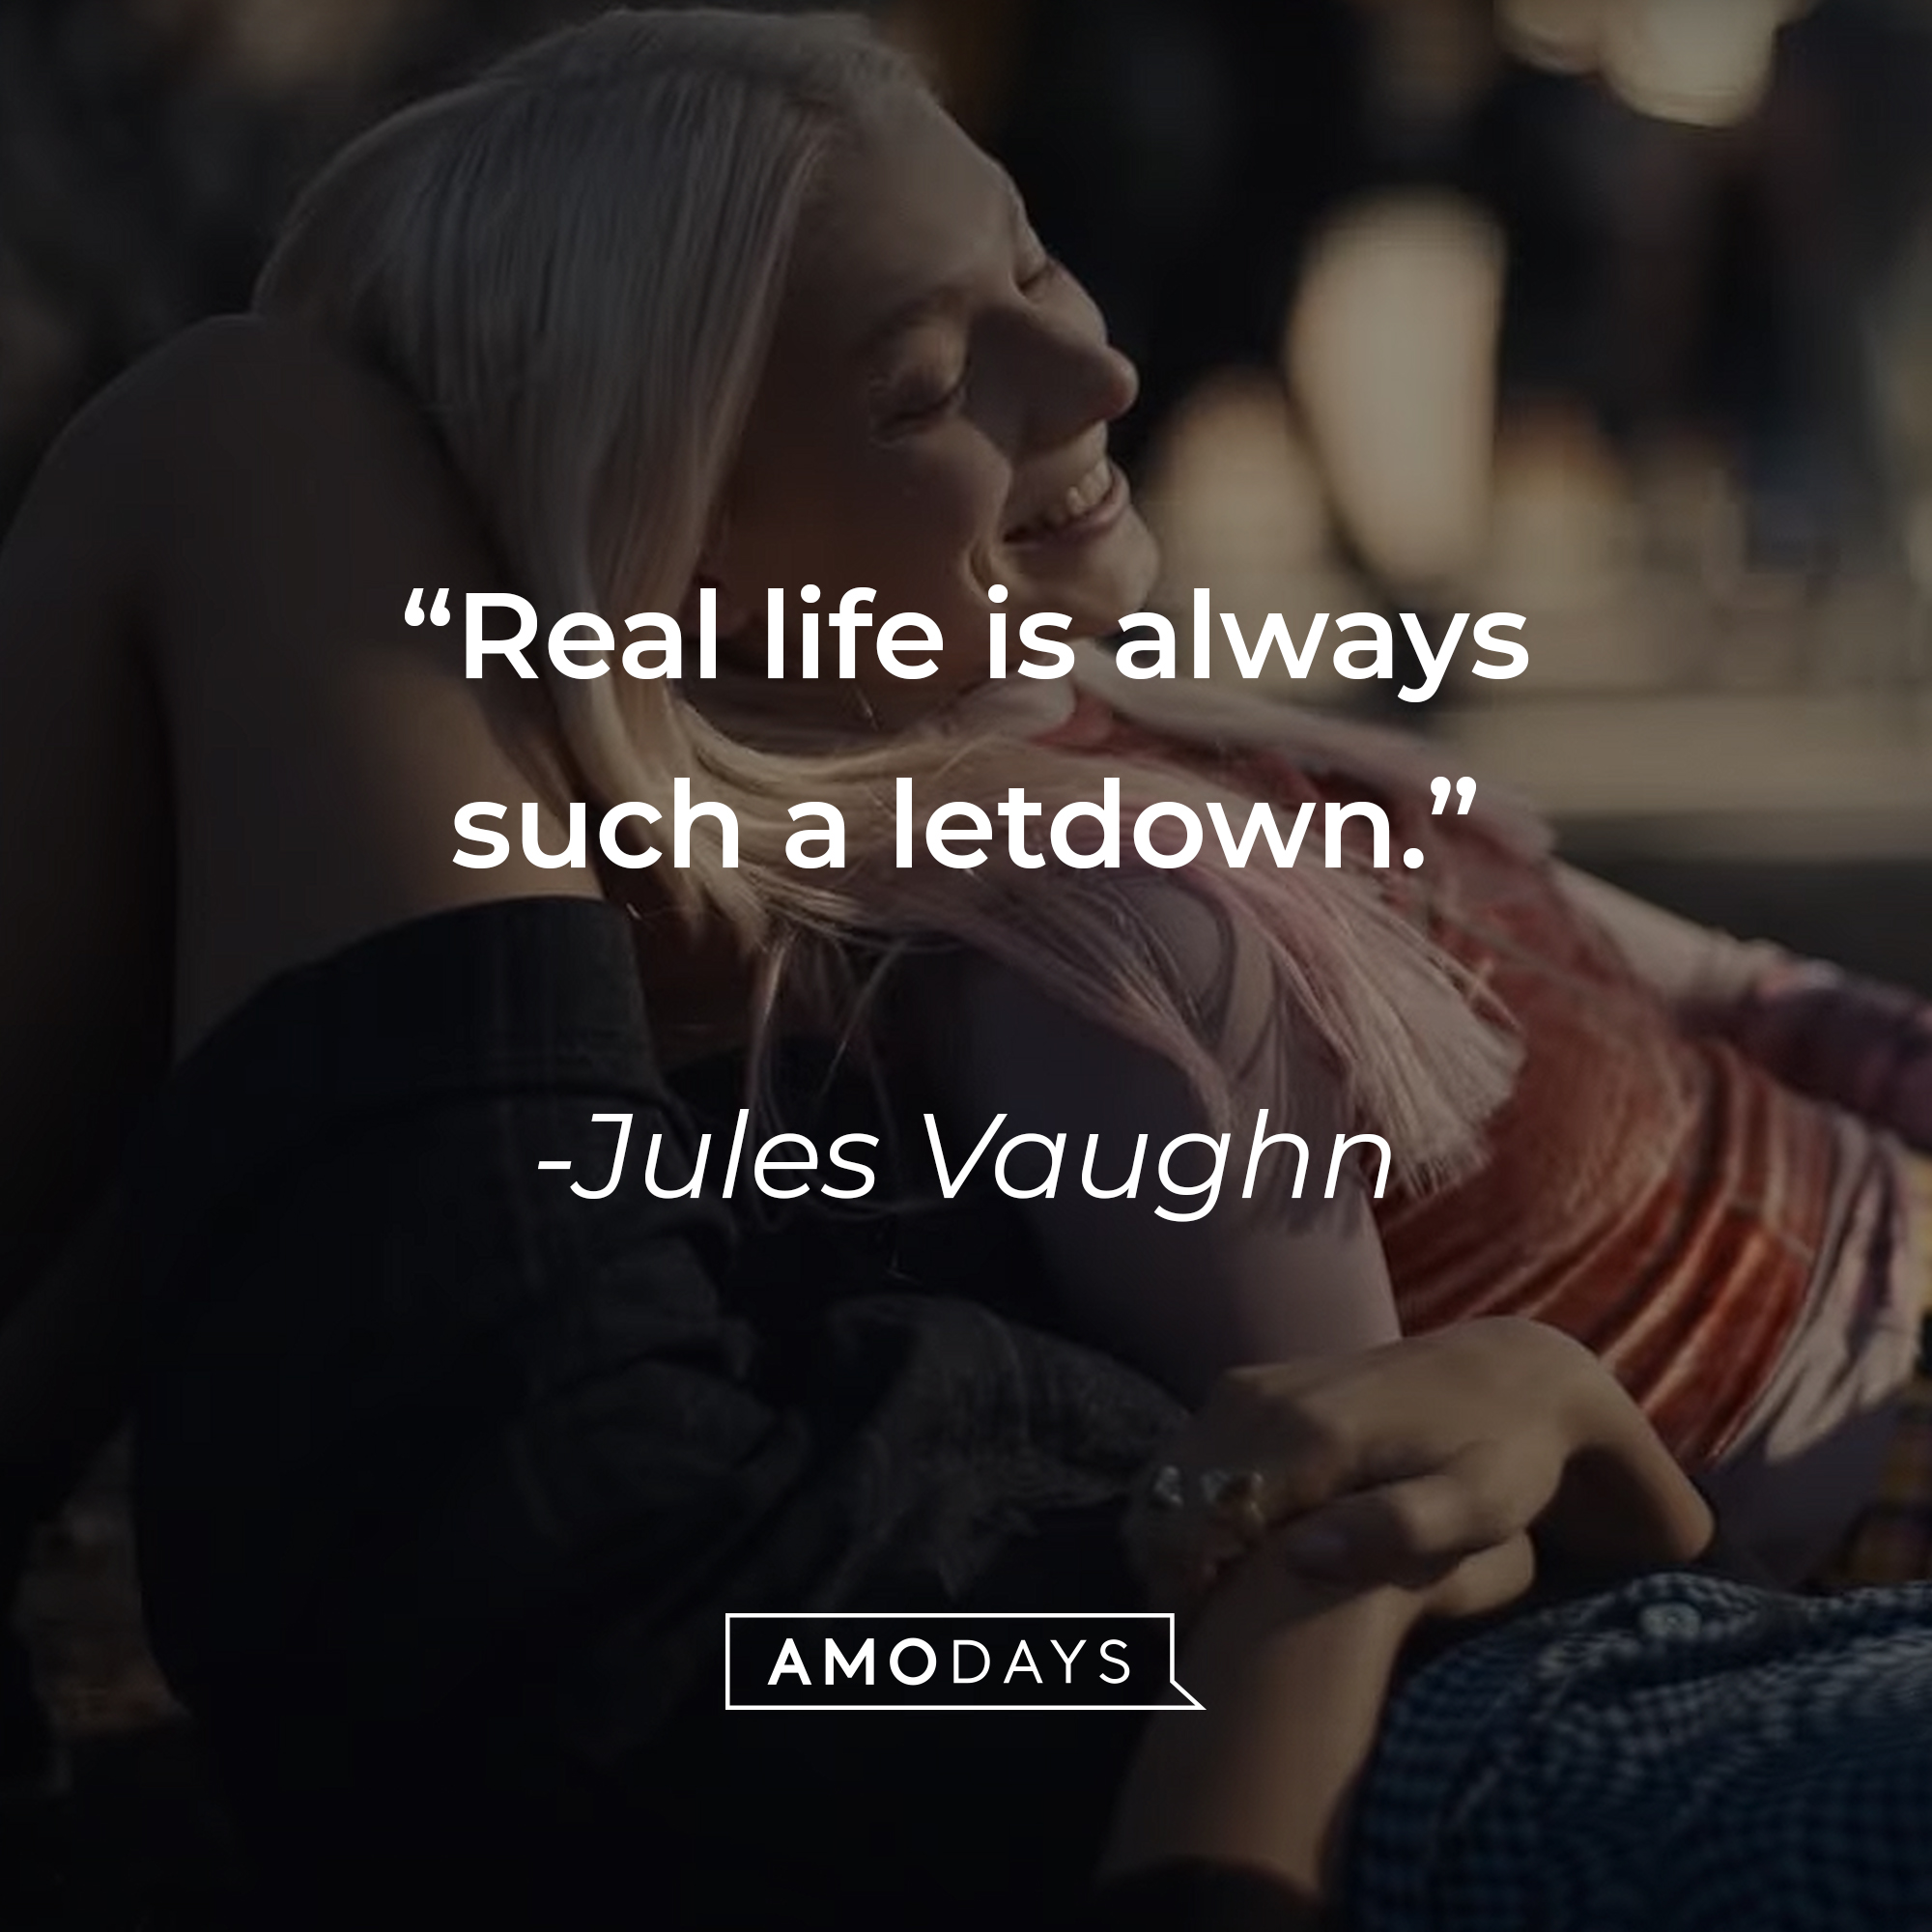 Jules Vaughn with her quote: "Real life is always such a letdown." | Source: HBO